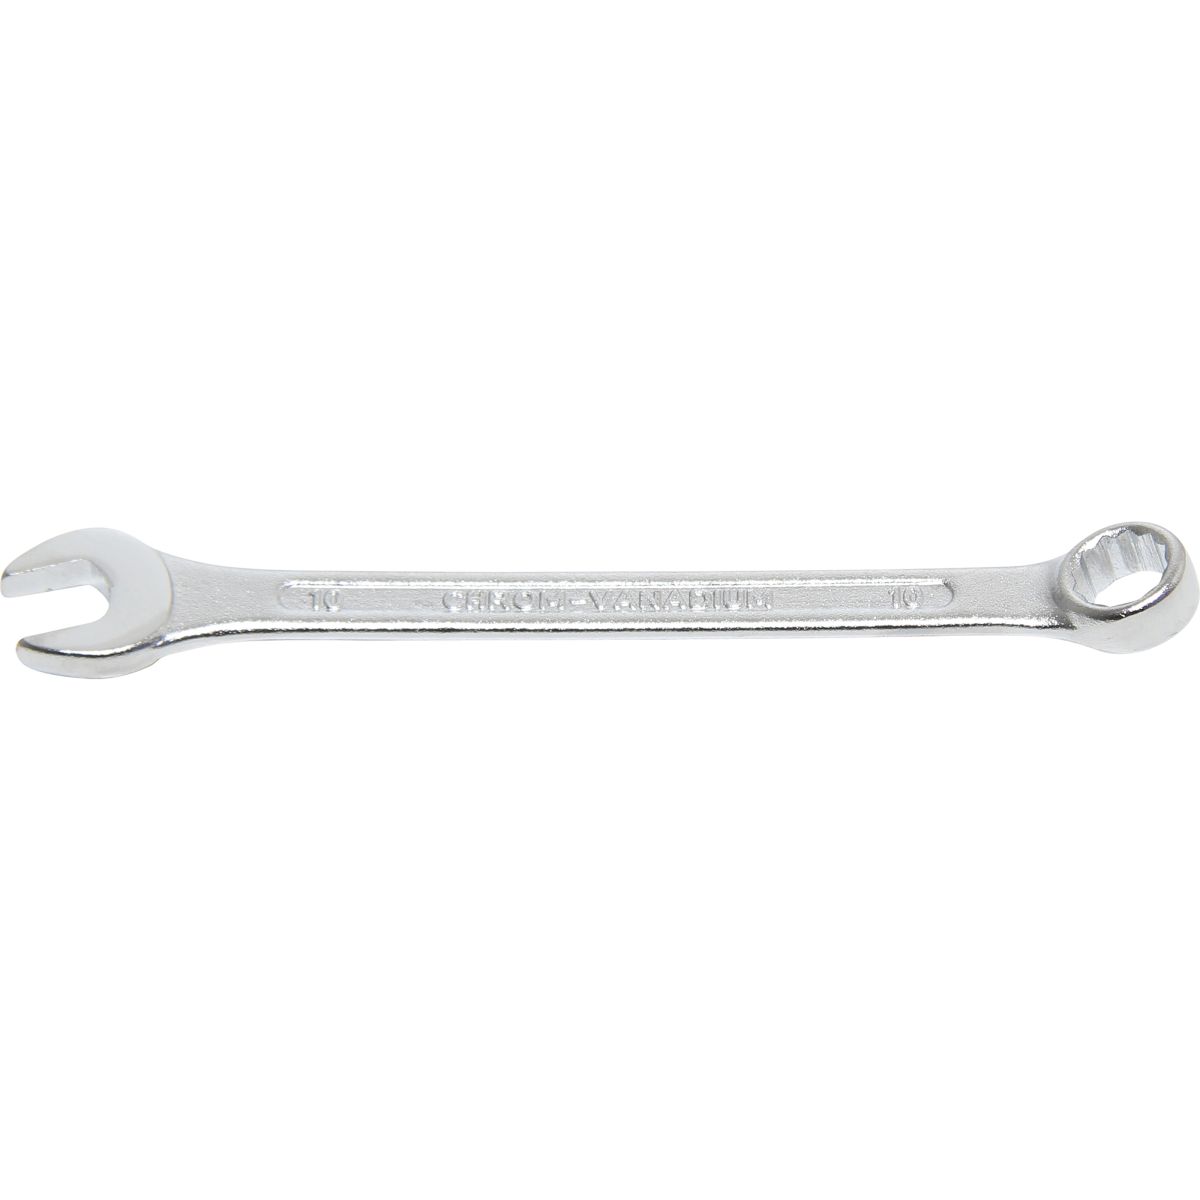 Combination Spanner | 10 mm